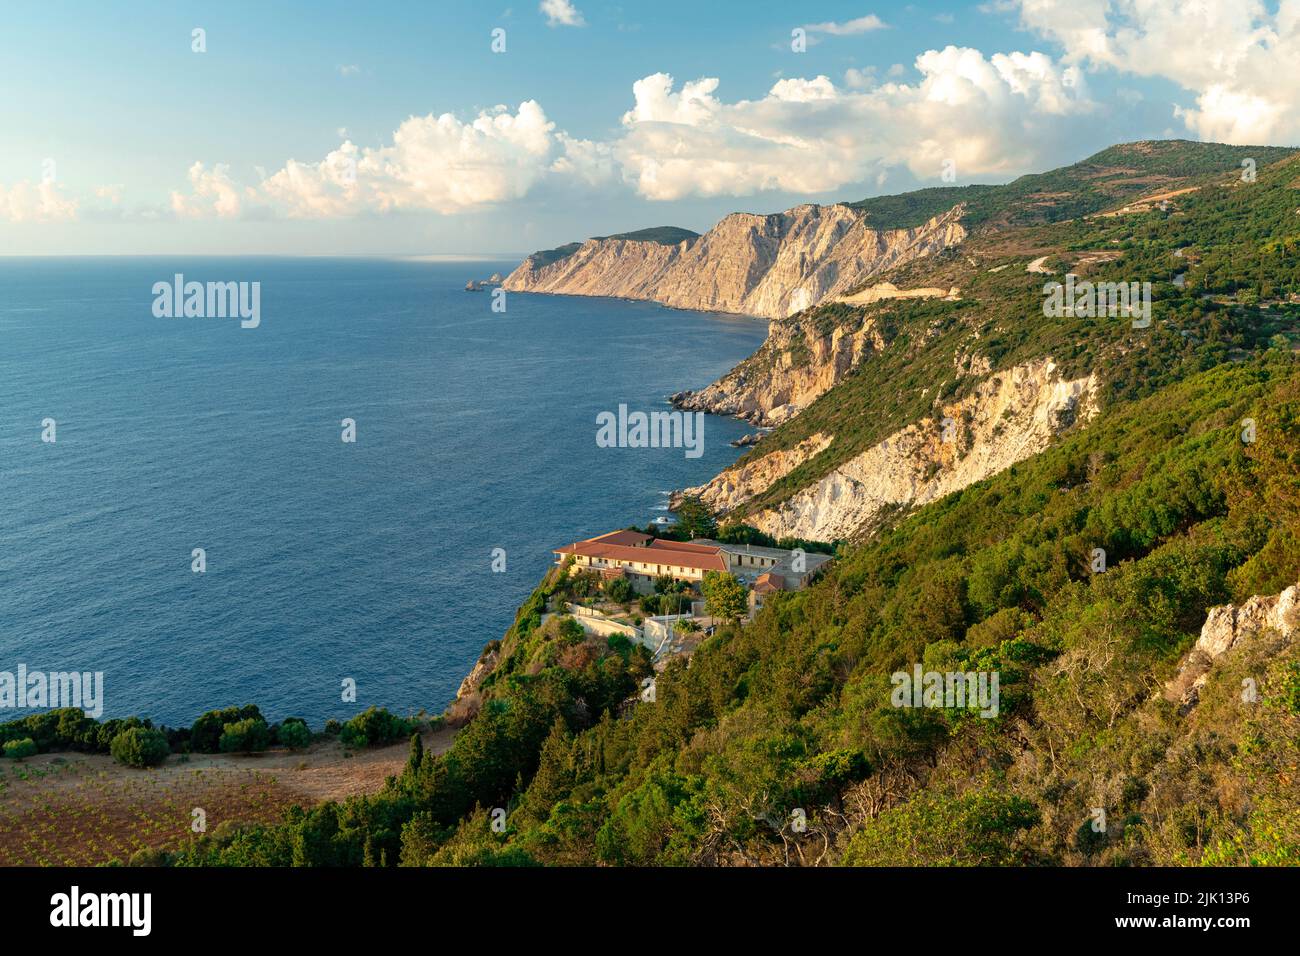 High angle view of Kipoureon monastery surrounded by trees on top of rocks overhanging the sea, Kefalonia, Ionian Islands, Greek Islands, Greece Stock Photo